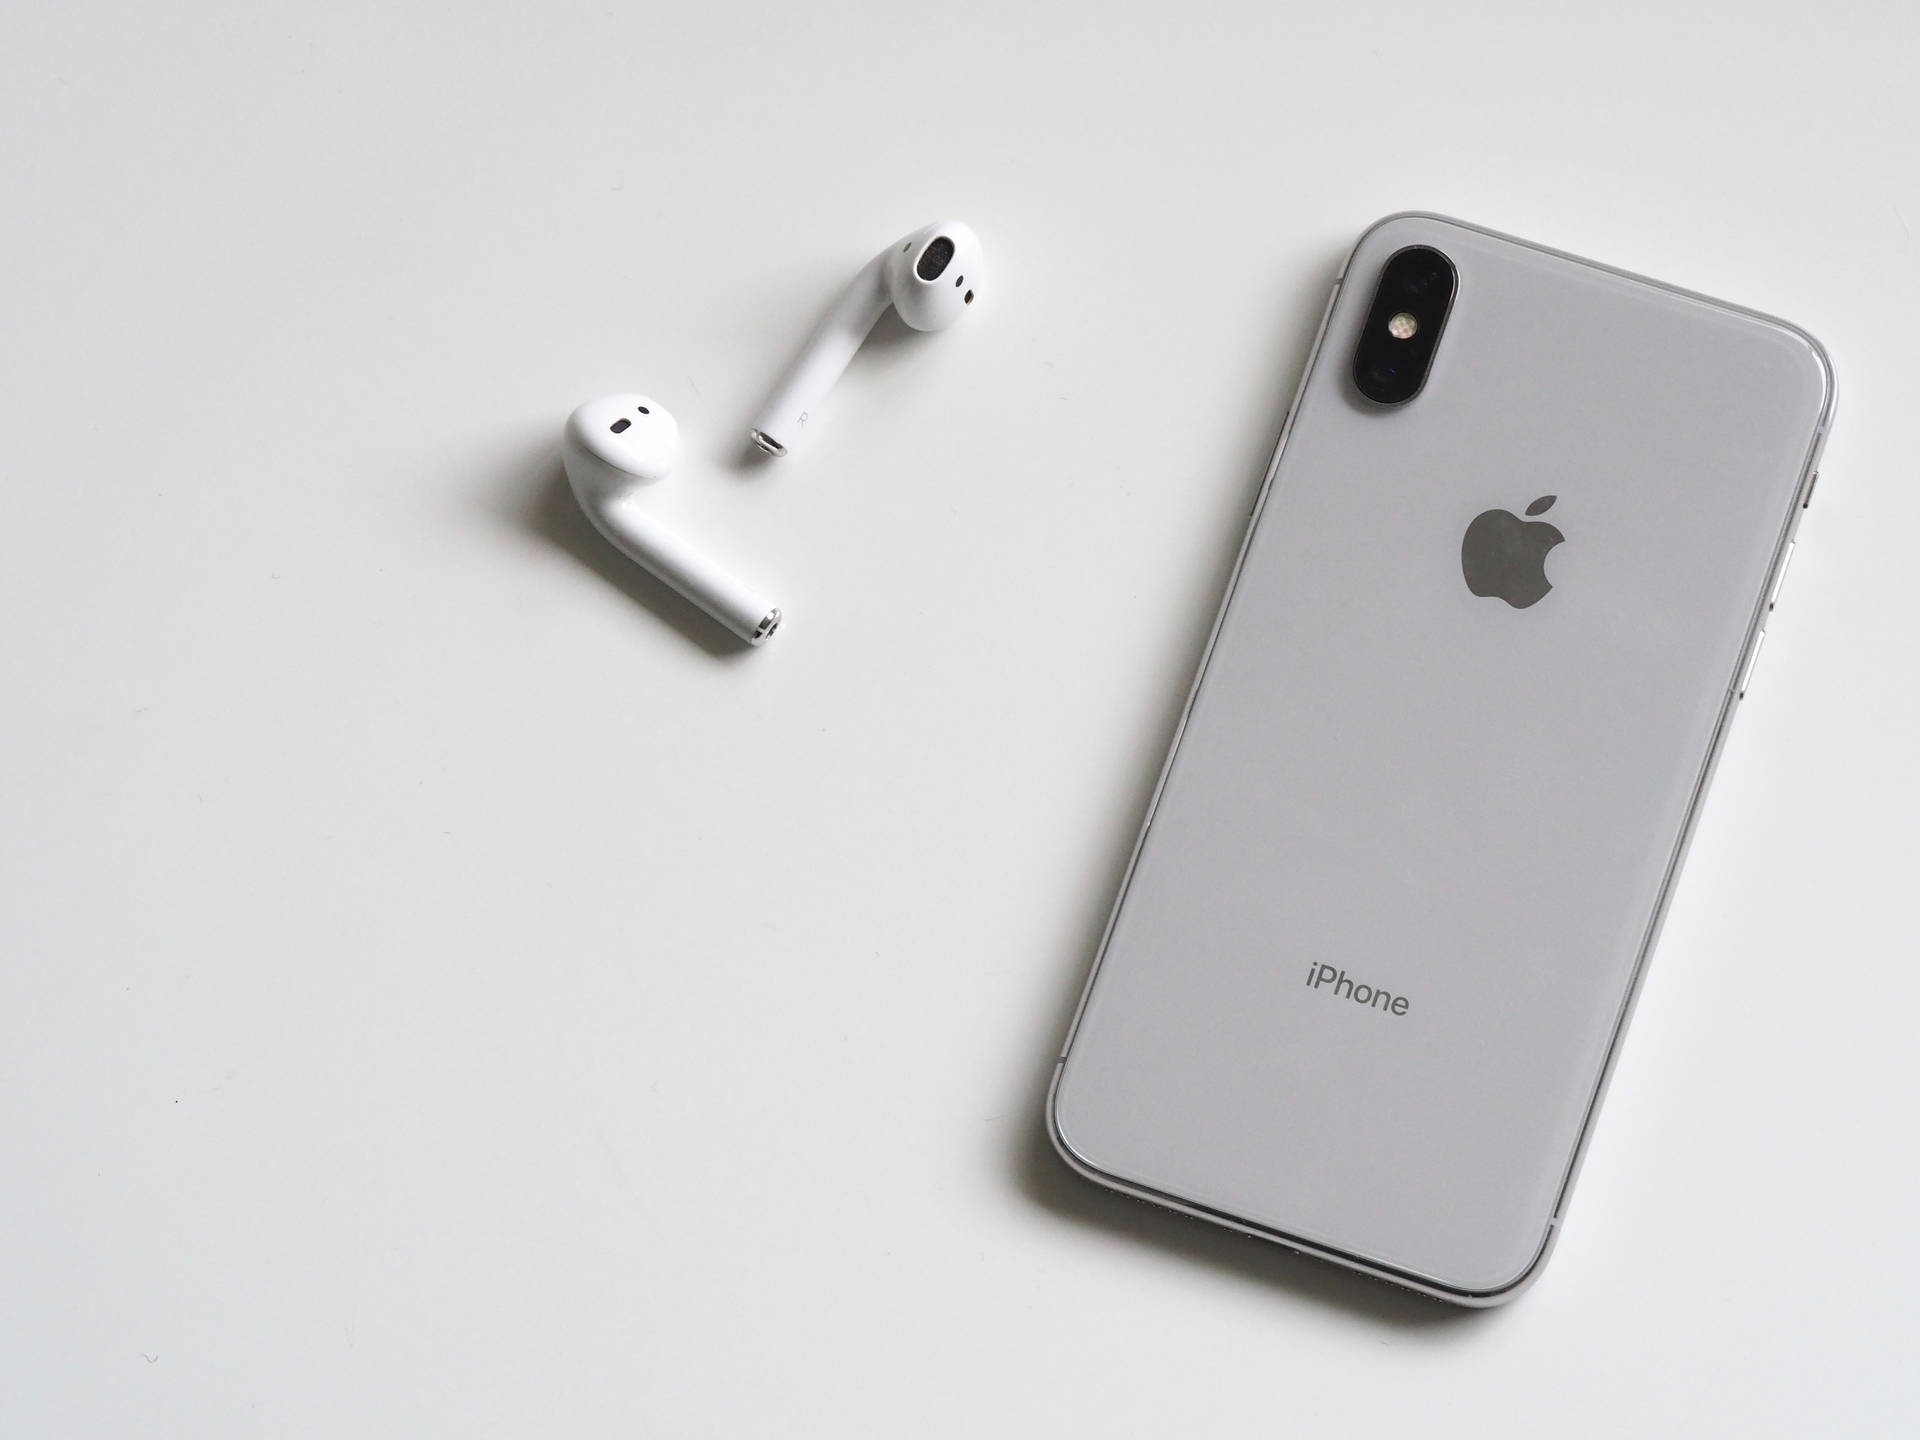 Cool Iphone Air Pods Wallpaper